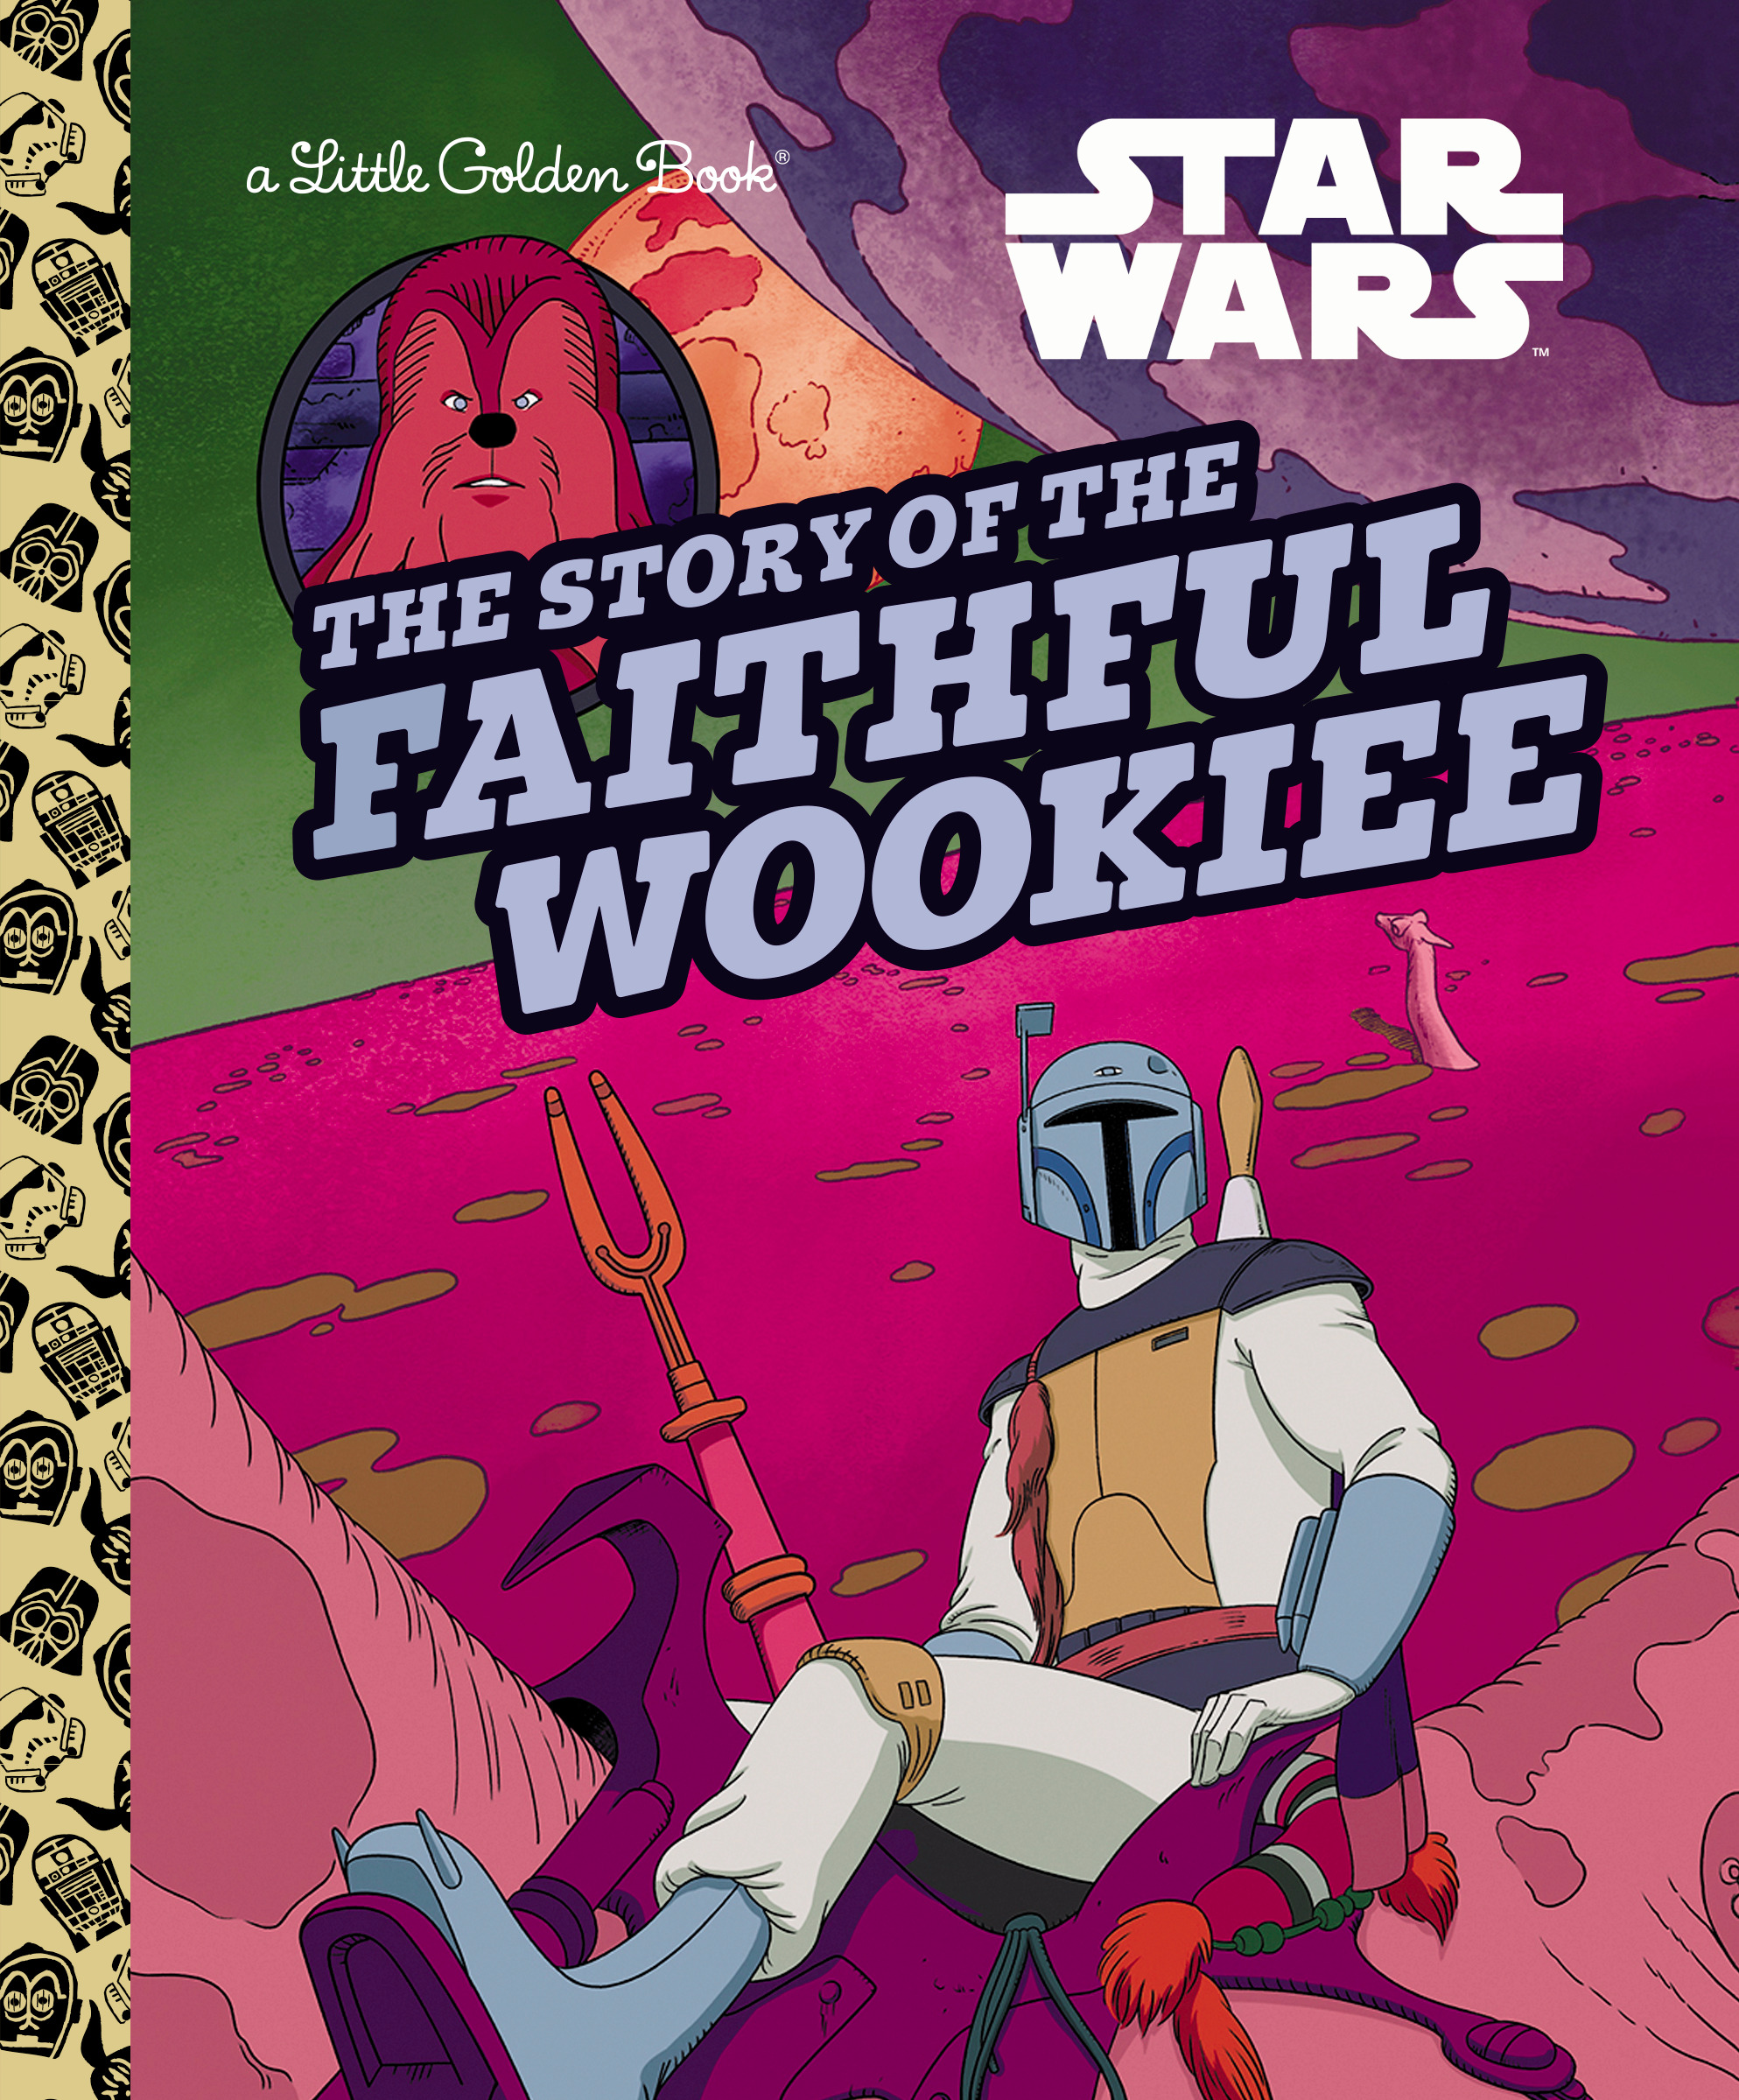 The Story of the Faithful Wookiee (Star Wars) | First reader